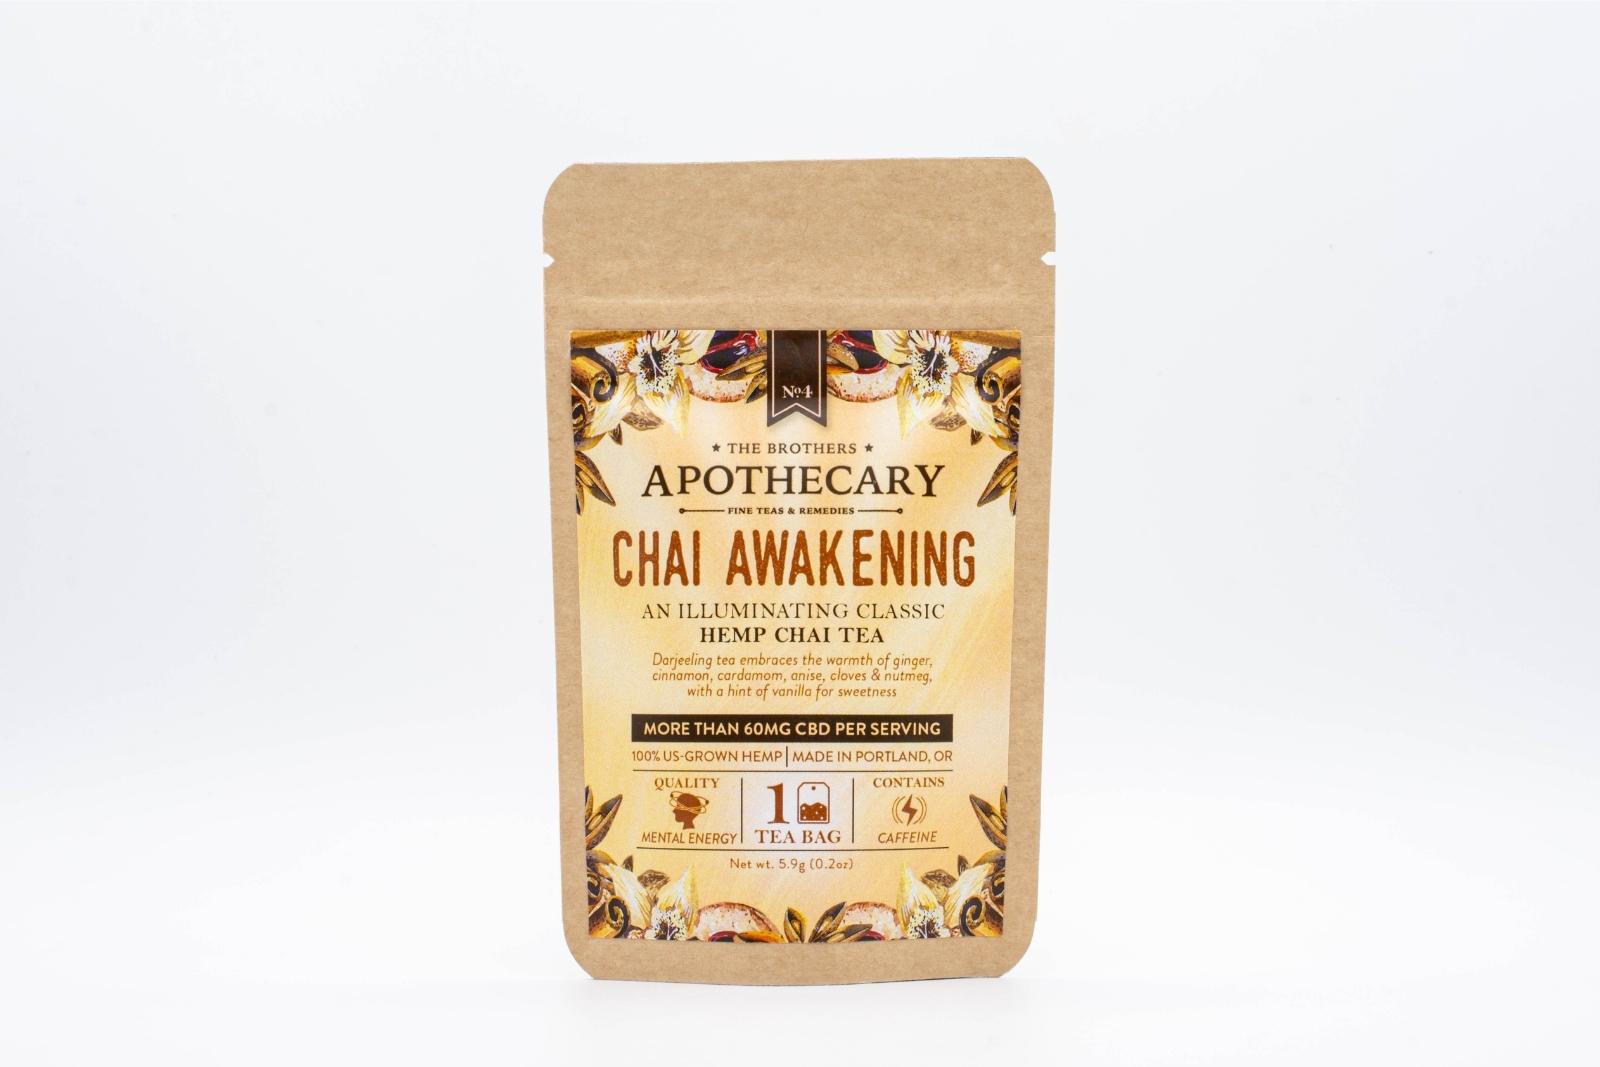 A small packet of The Brothers Apothecary's Chai Awakening CBD Tea on a white background